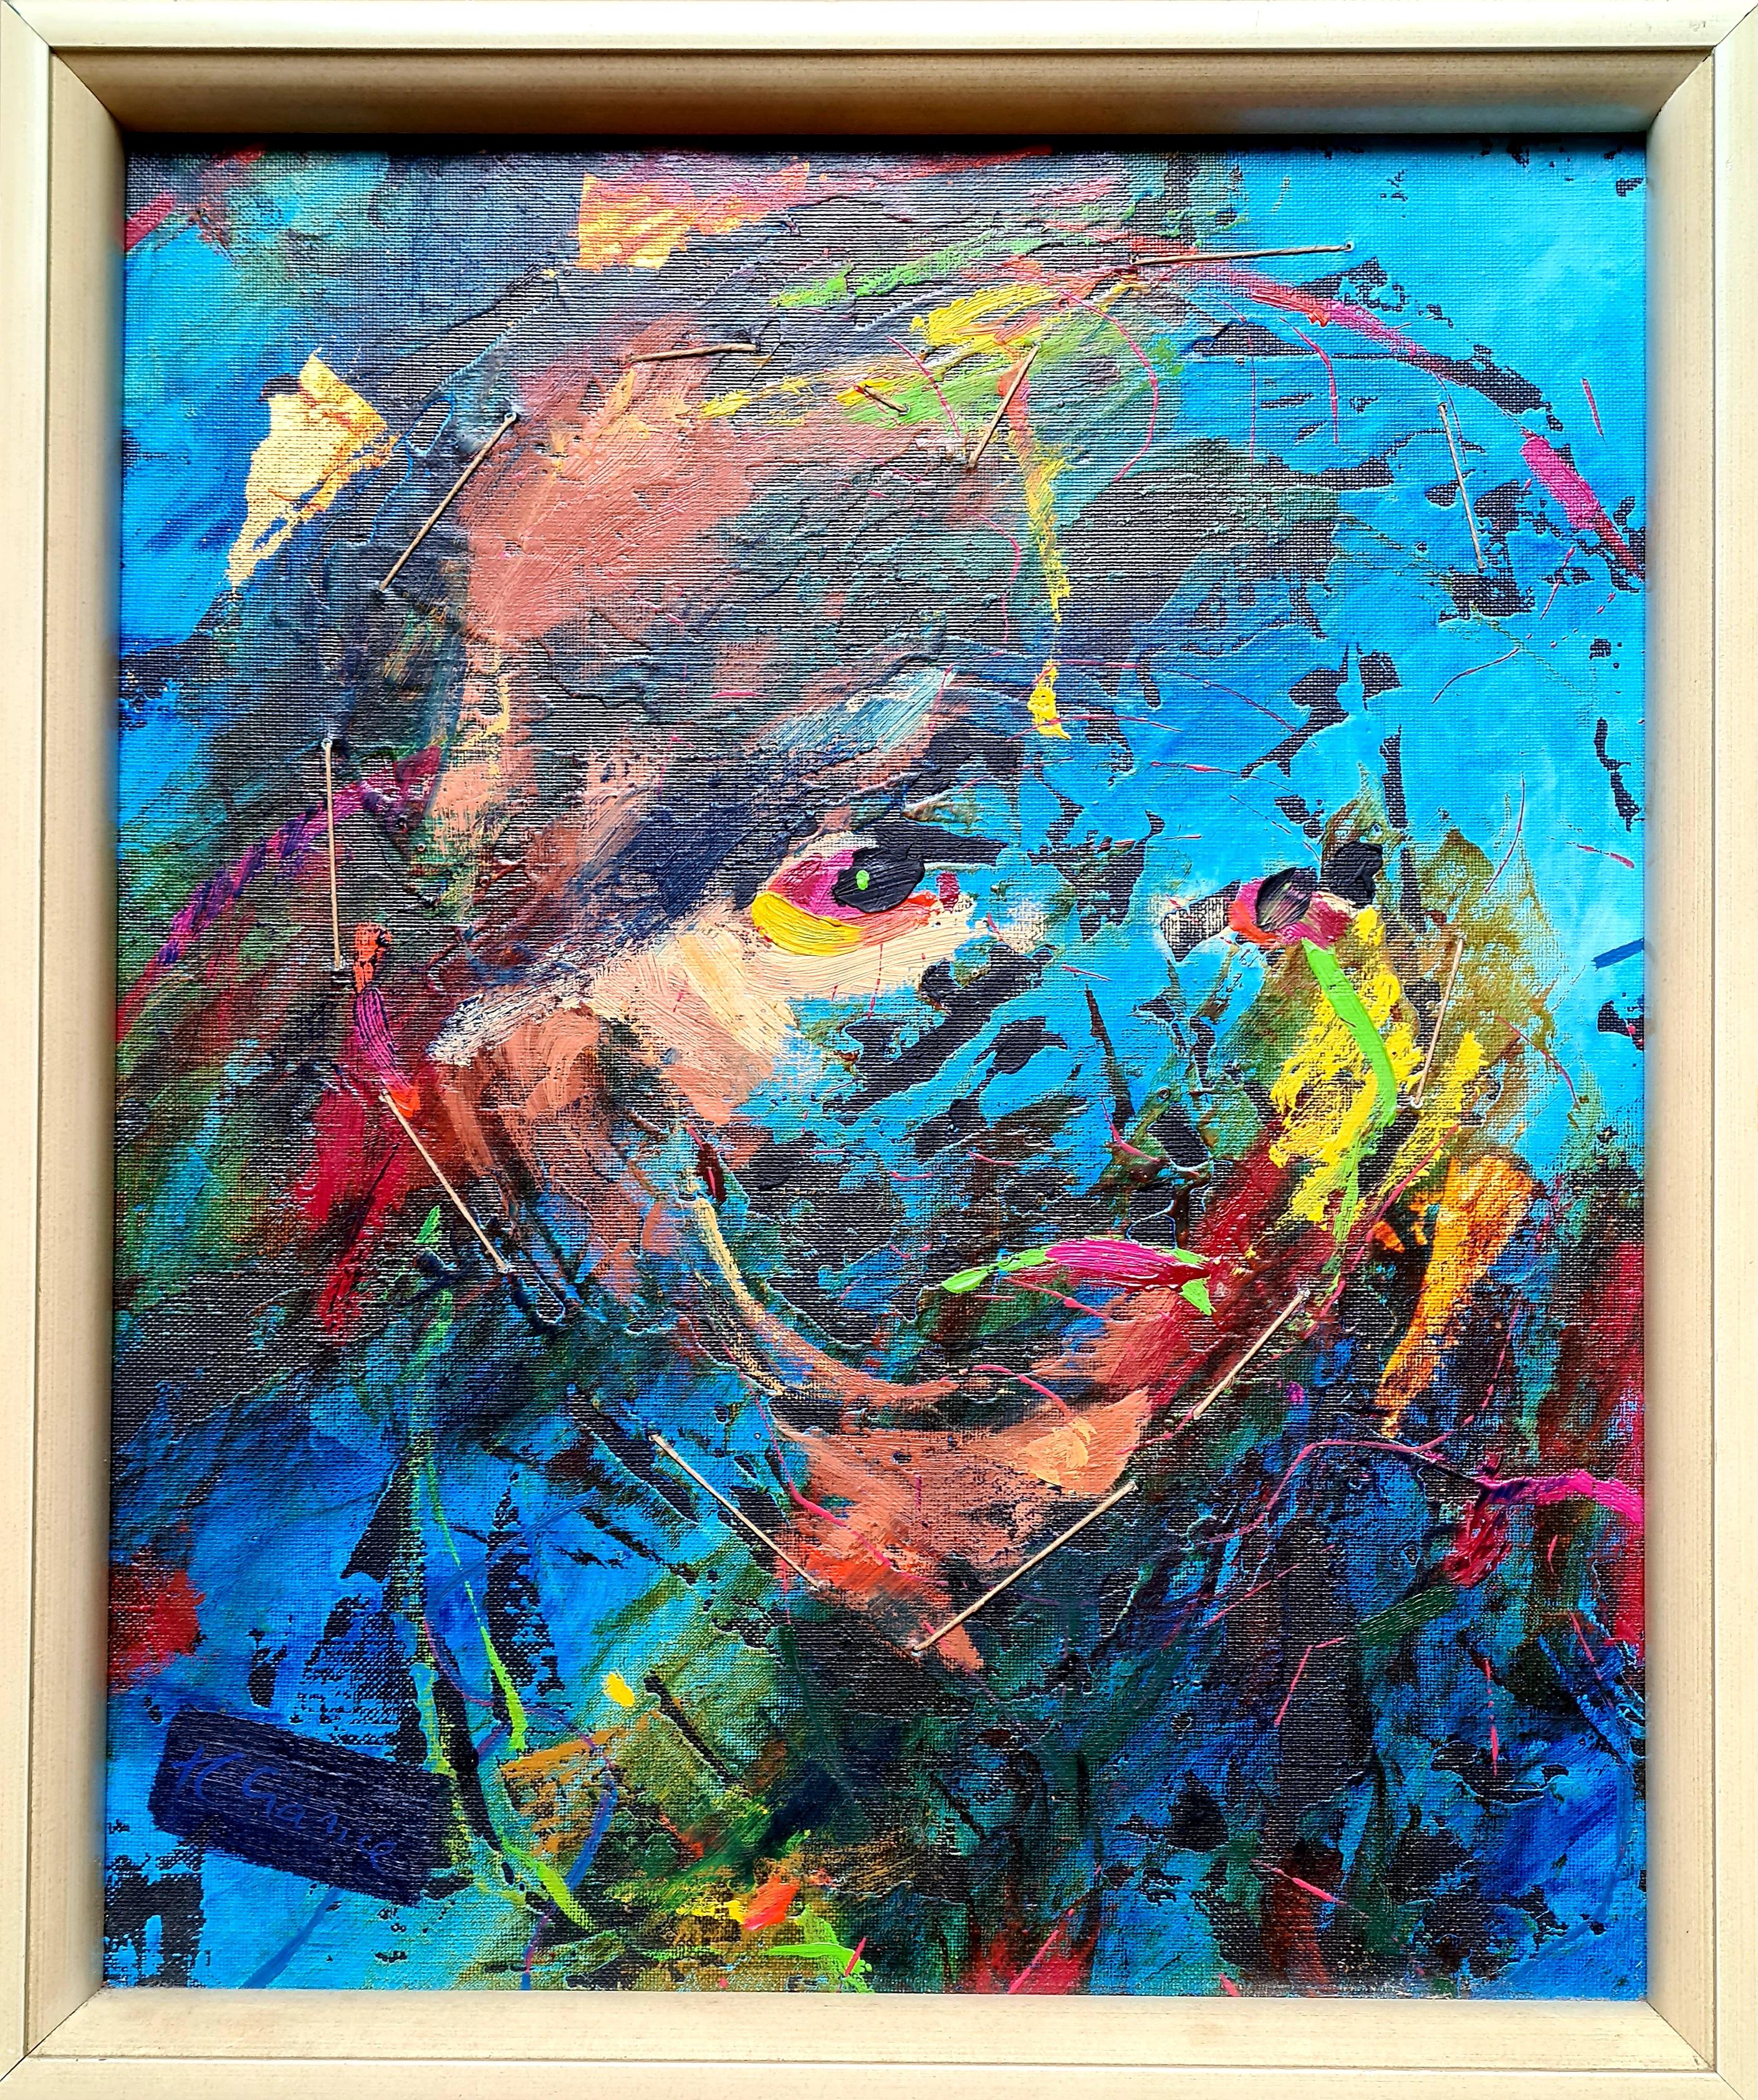 Joel Crance Portrait Painting - Narcissus, Pose 18, French Abstract Expressionist Portrait. Acrylic on Canvas. 